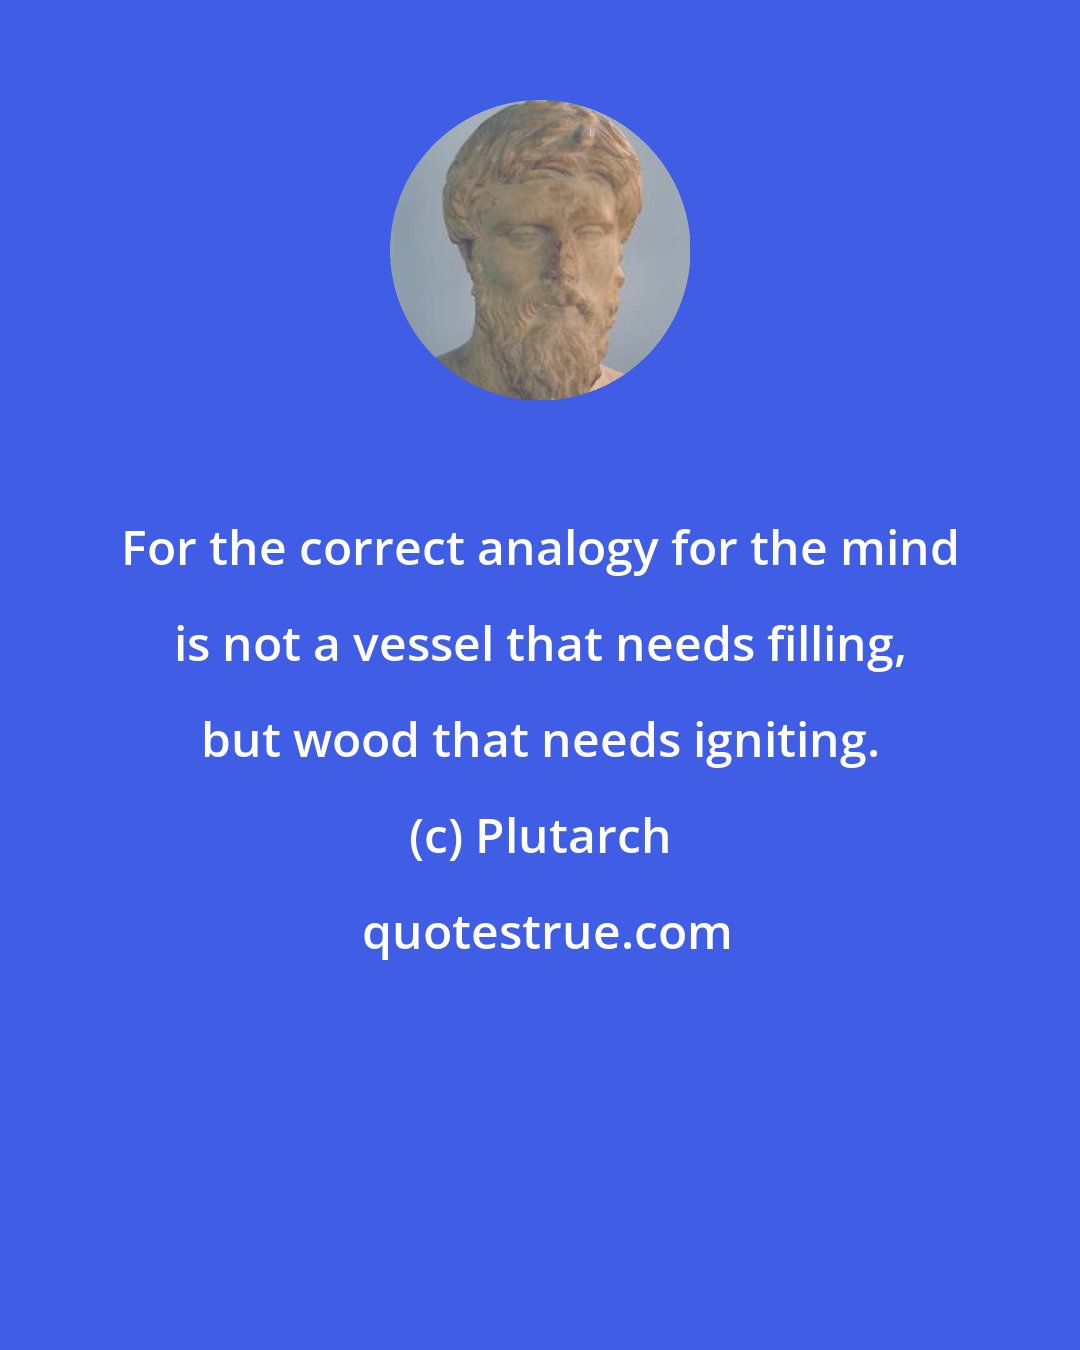 Plutarch: For the correct analogy for the mind is not a vessel that needs filling, but wood that needs igniting.